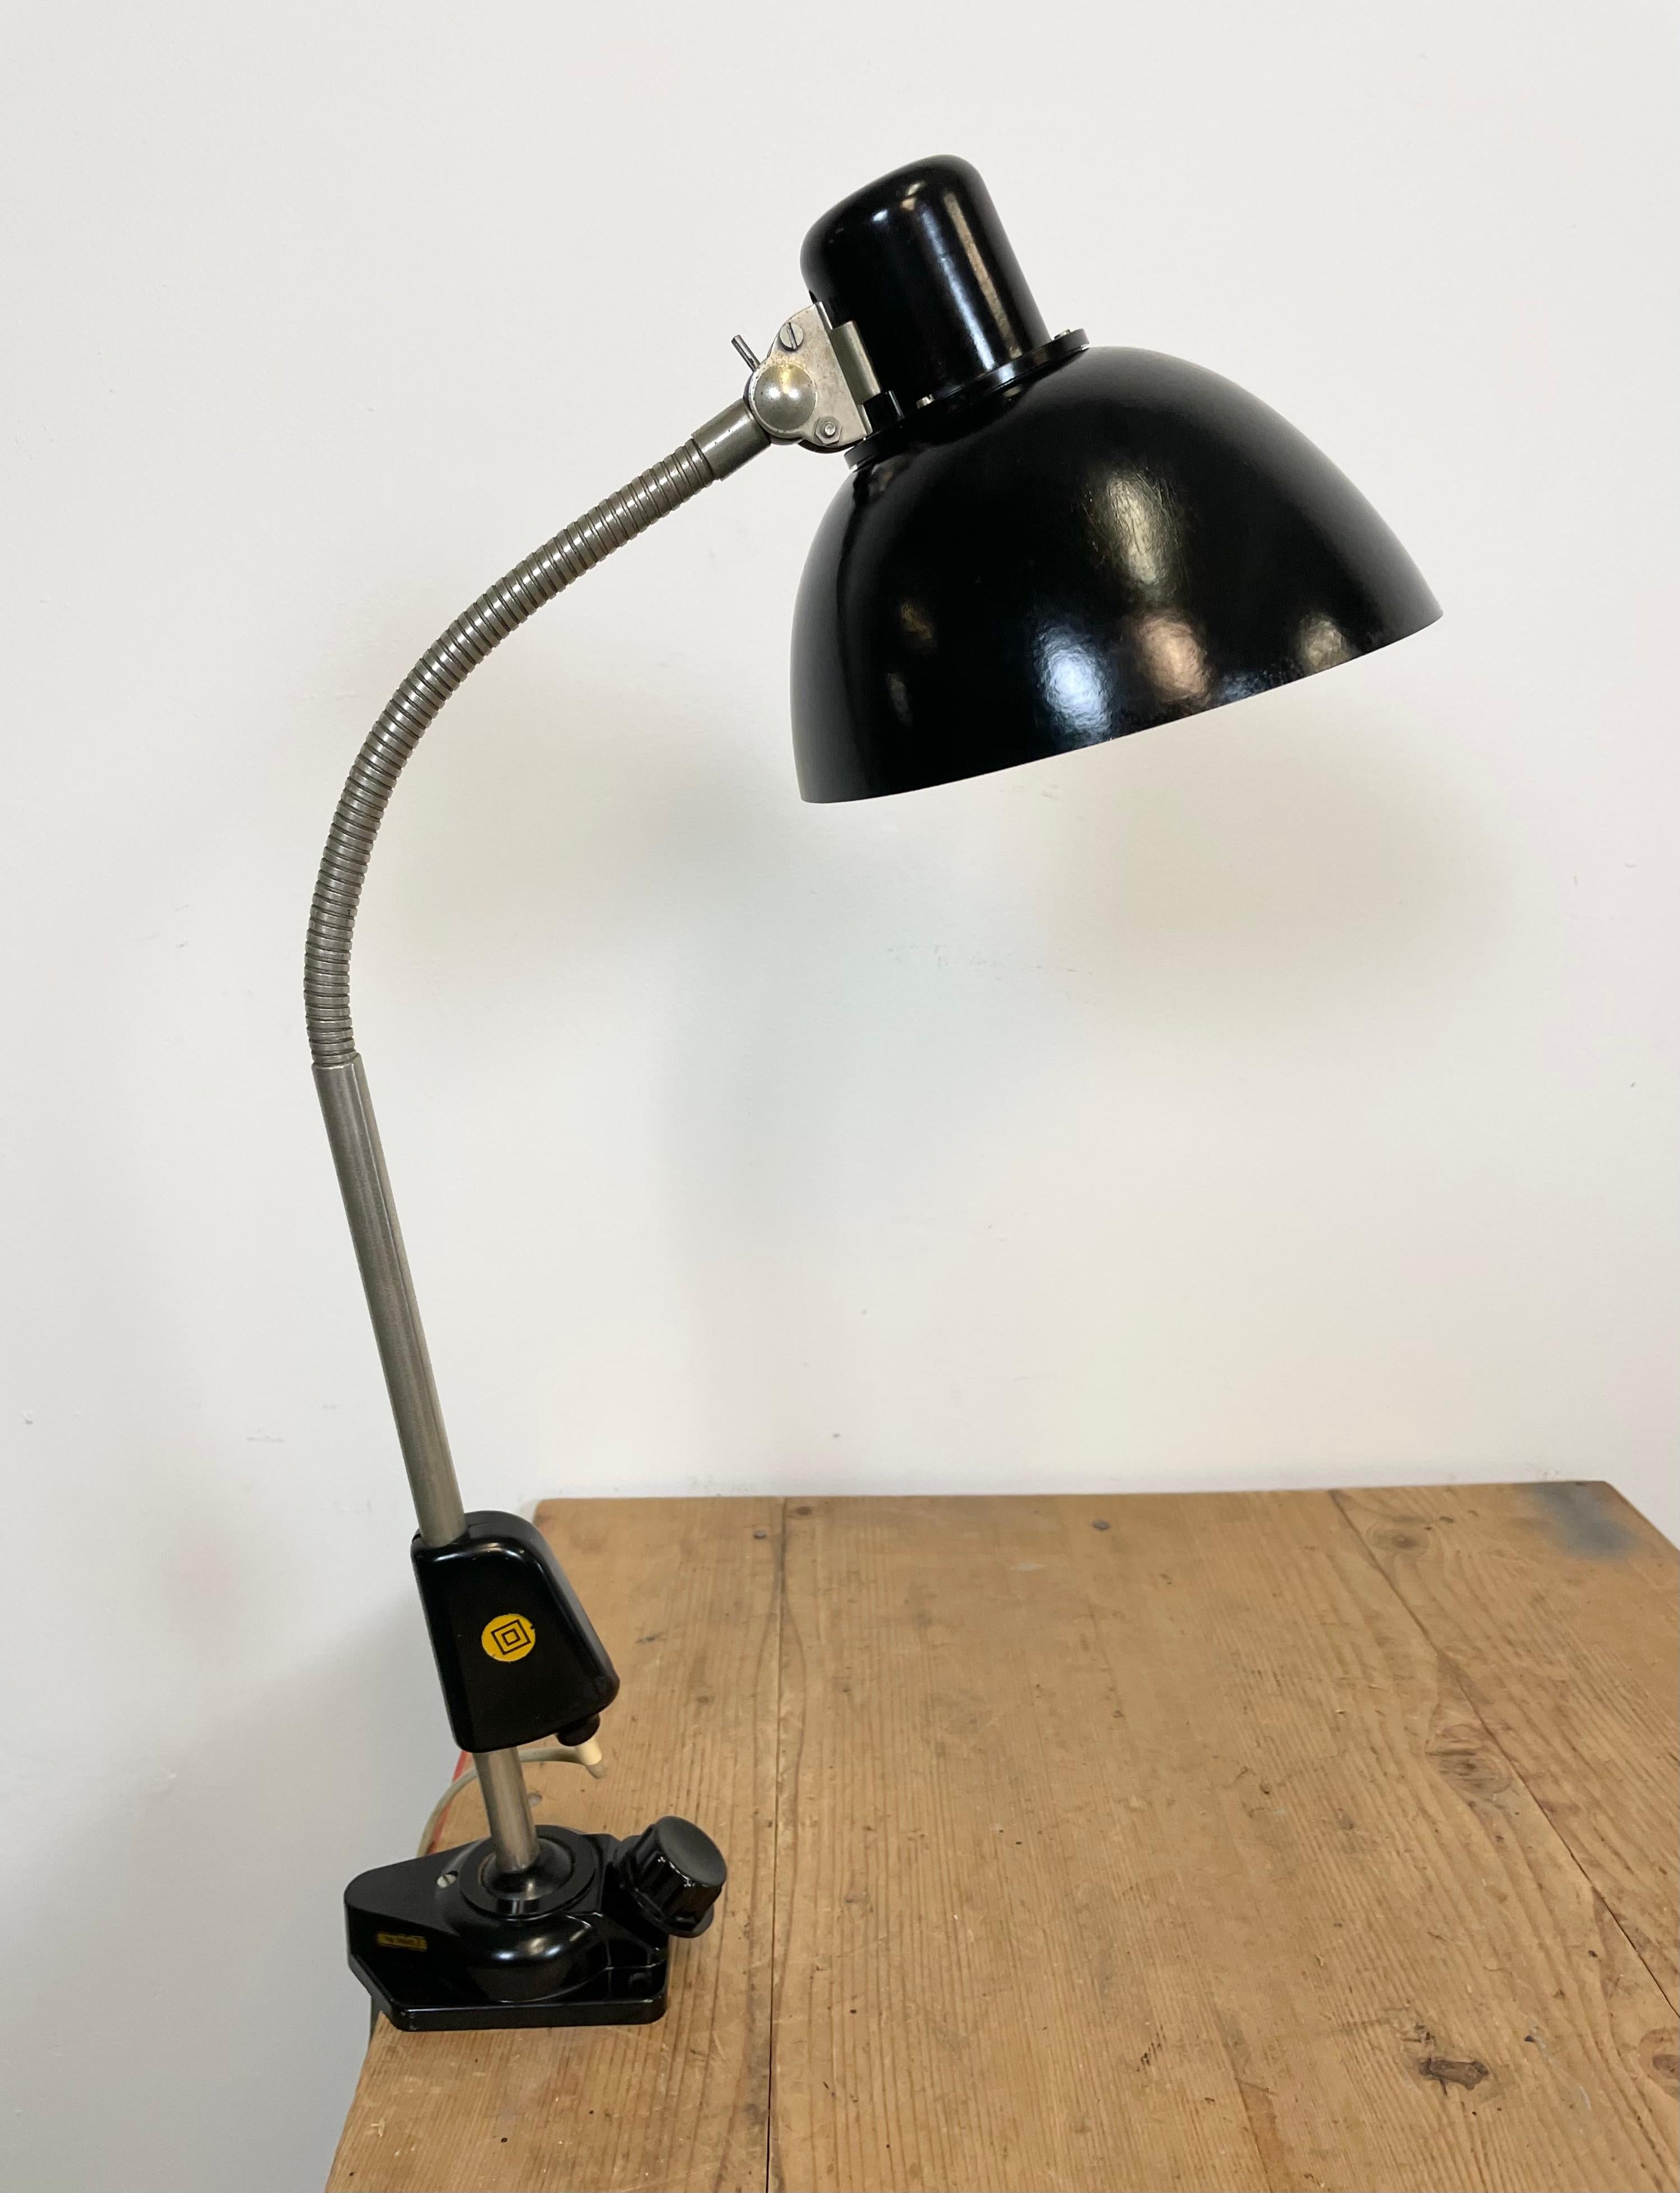 Chrome Industrial German Workshop Table Lamp from Reif Dresden, 1950s For Sale